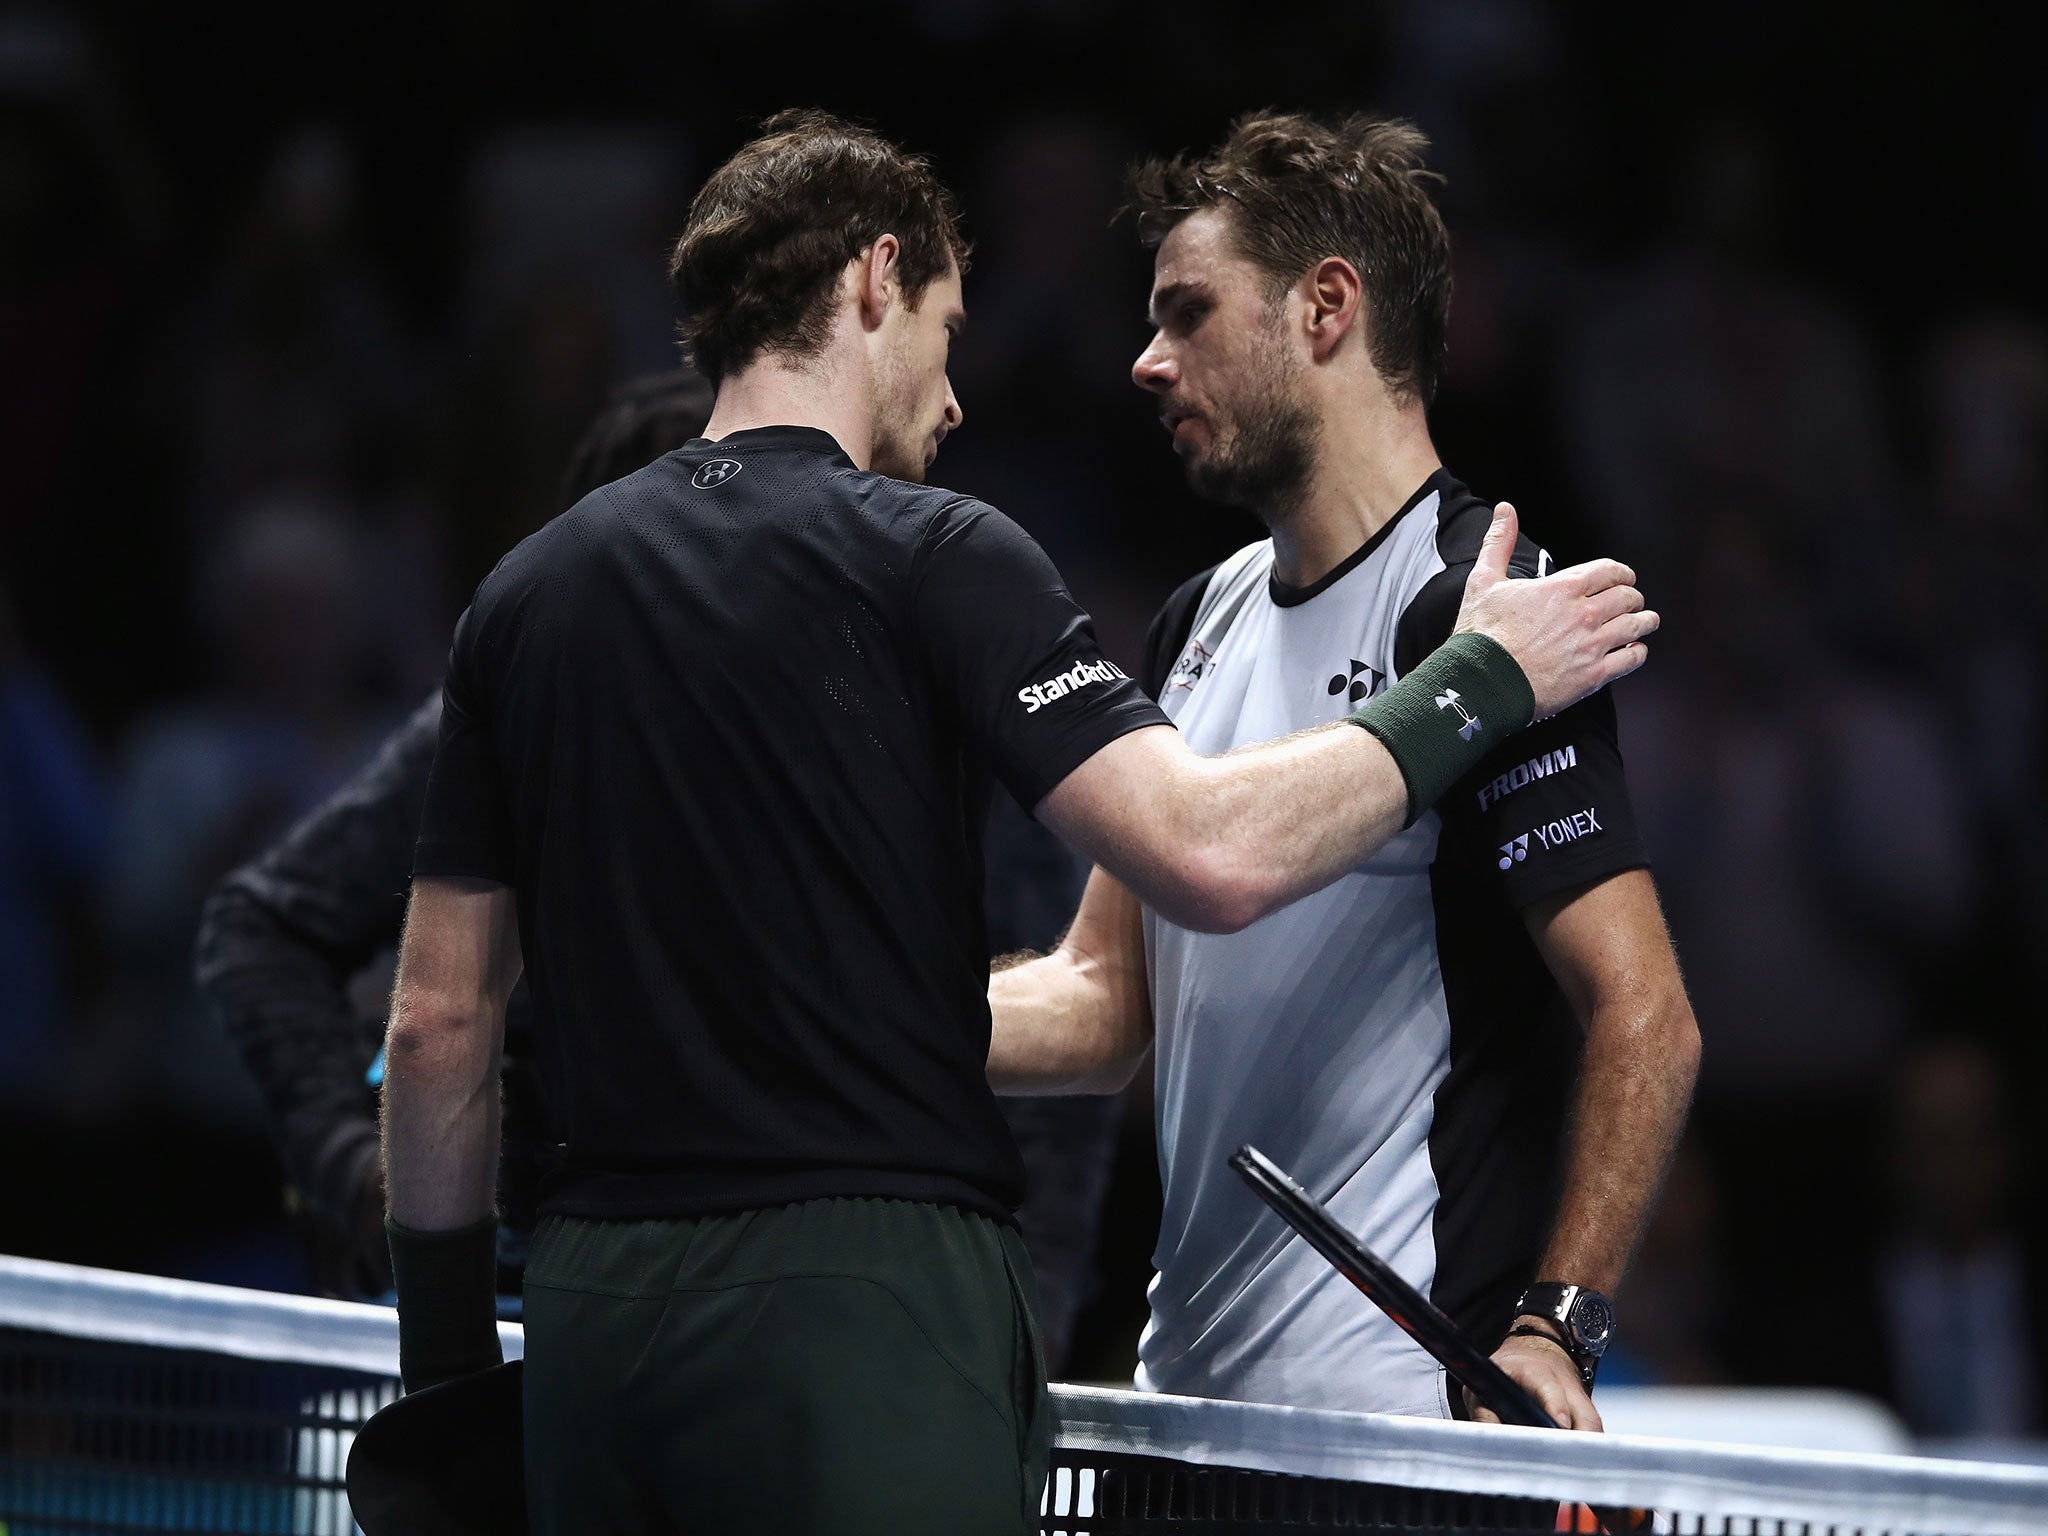 Andy Murray is congratulated by Stan Wawrinka after his group match victory at the ATP World Tour Finals